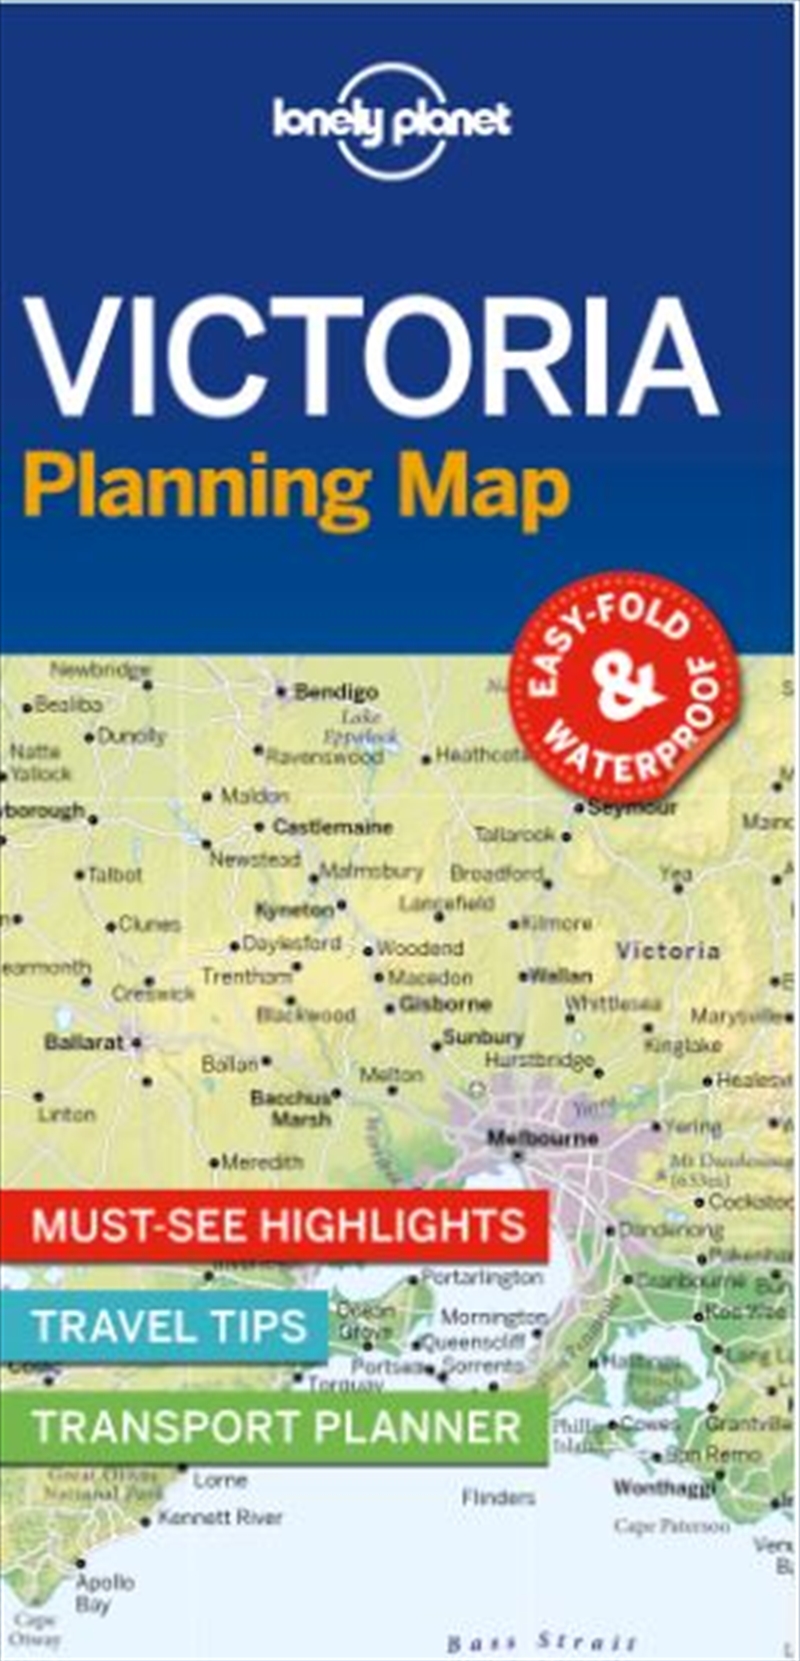 Lonely Planet Victoria Planning Map/Product Detail/Travel & Holidays